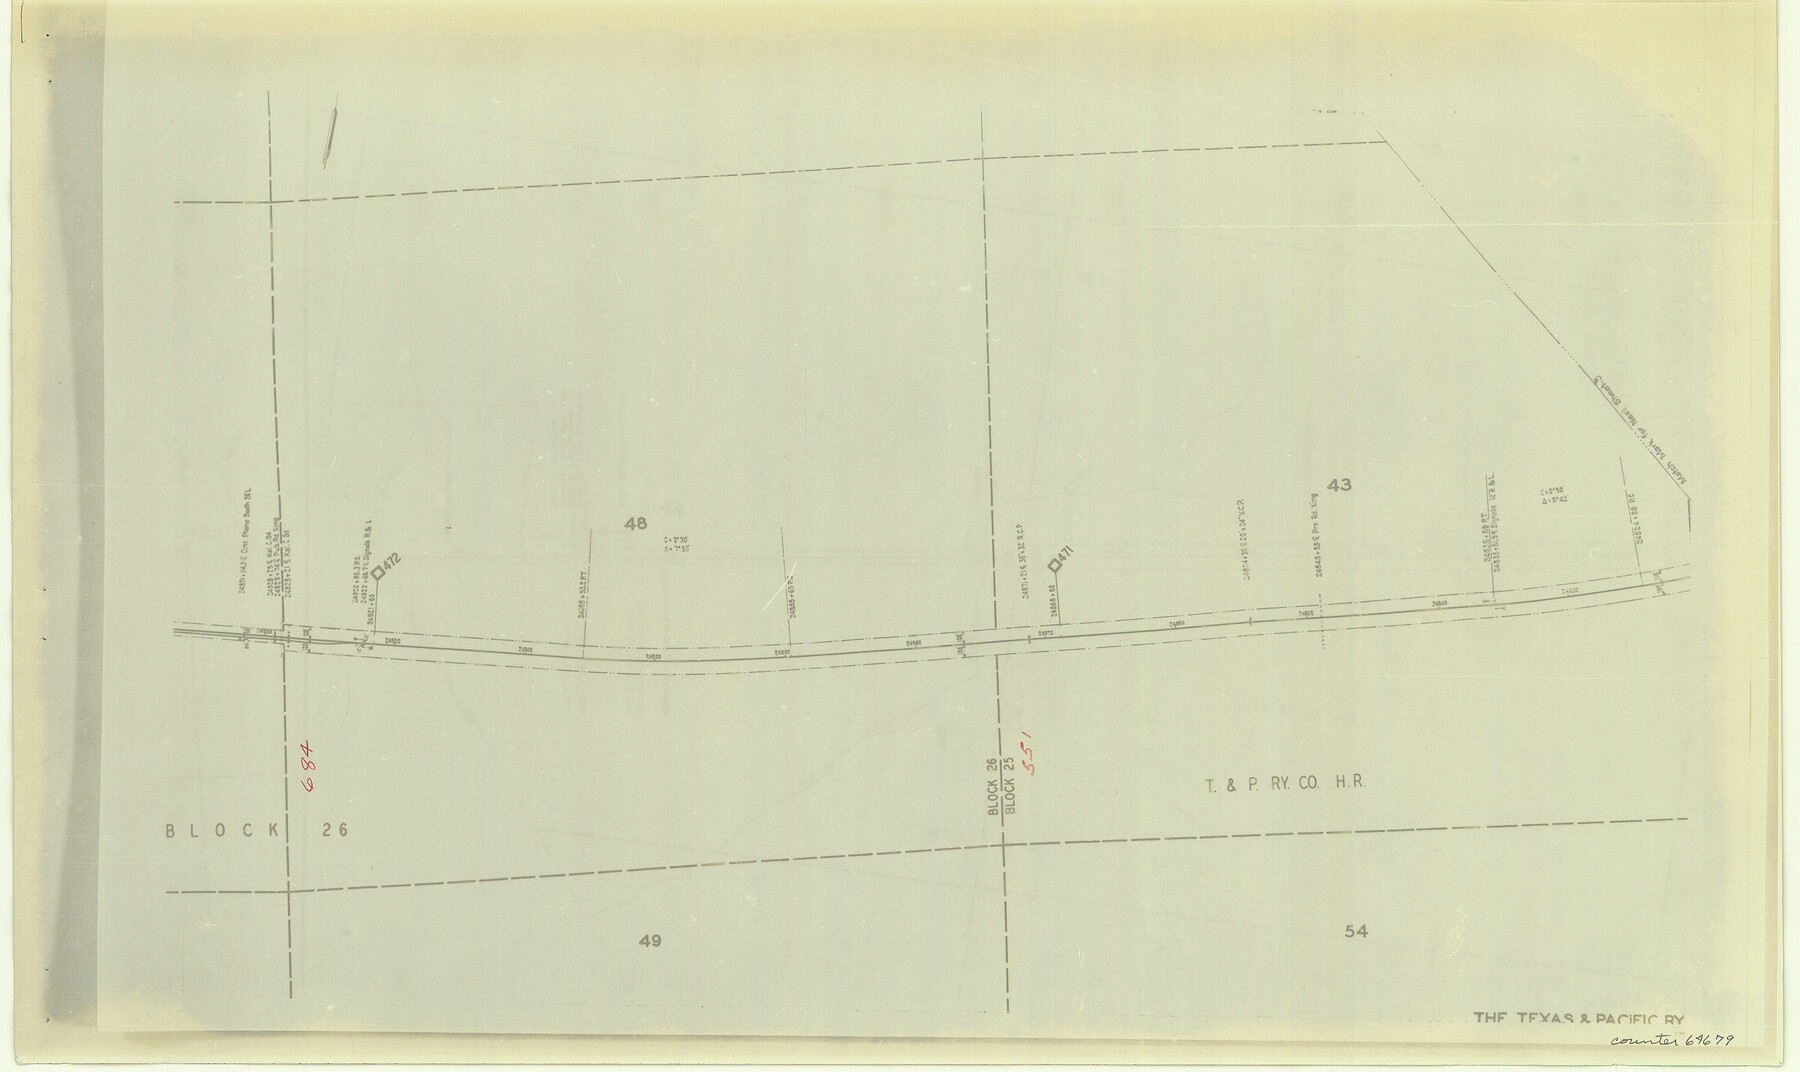 64679, [Right of Way & Track Map, The Texas & Pacific Ry. Co. Main Line], General Map Collection